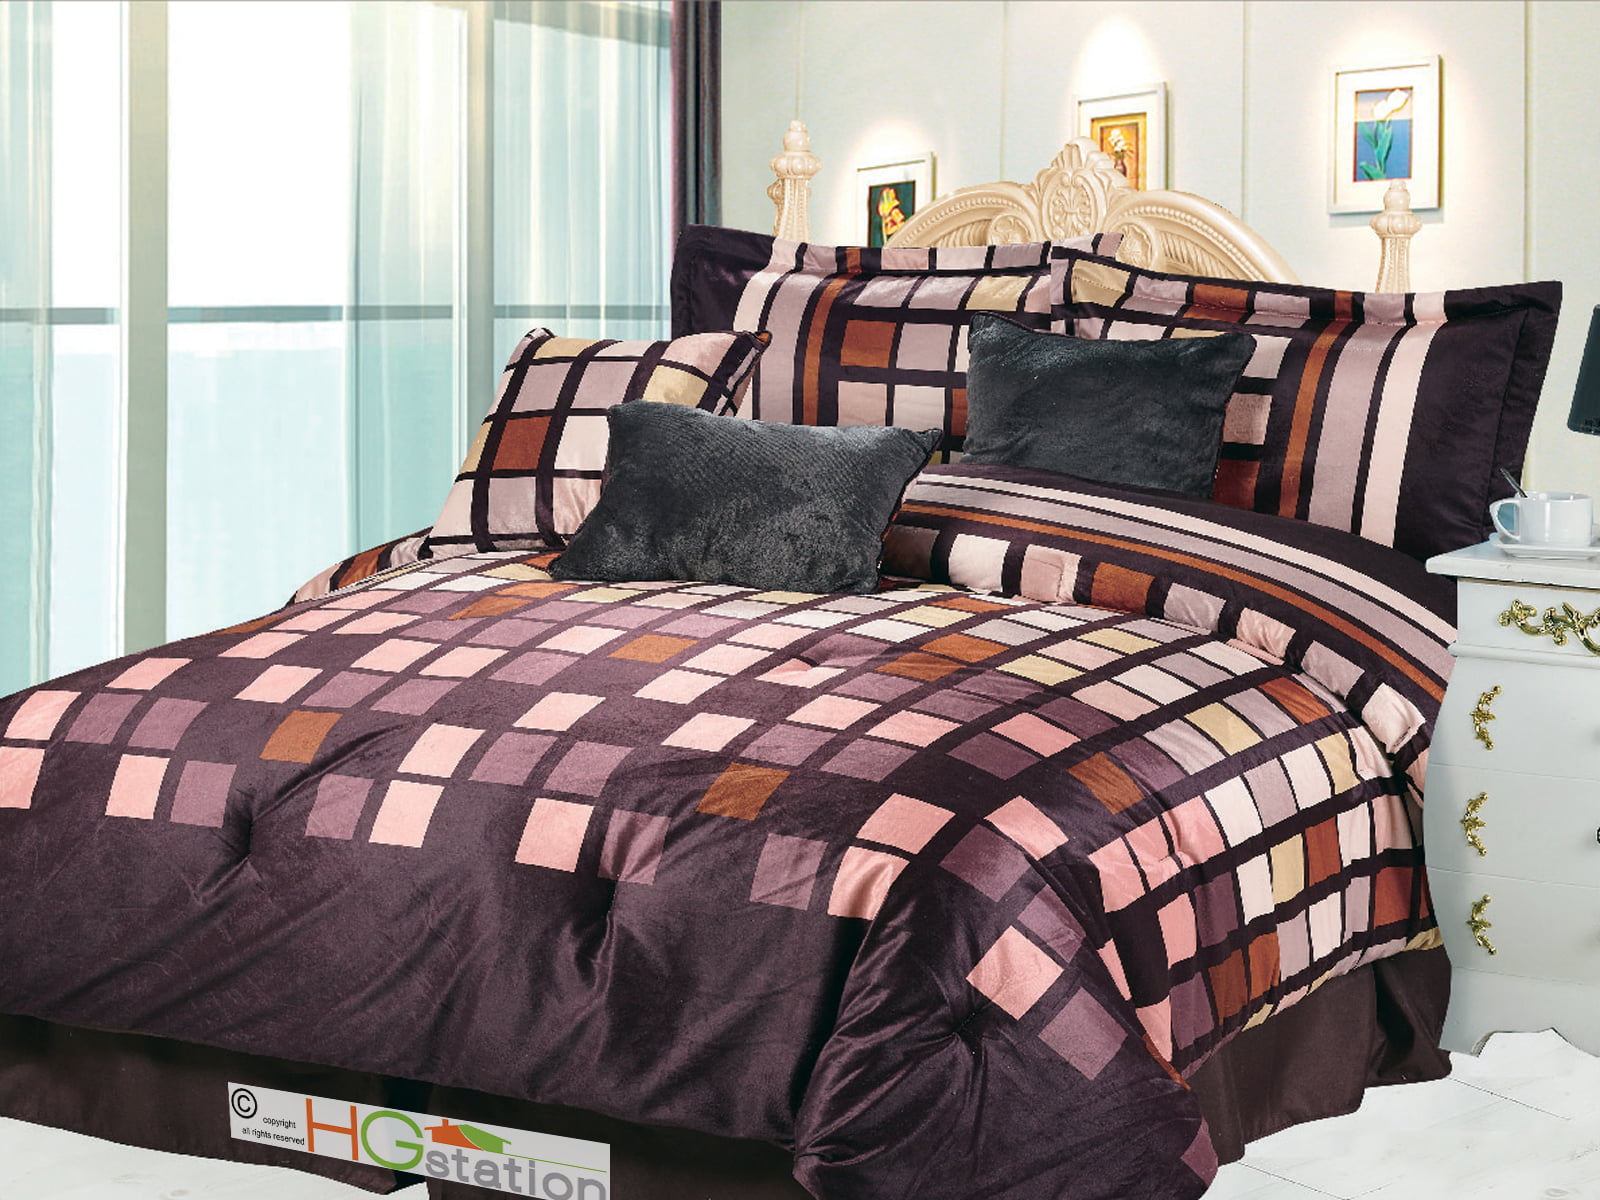 7-Pc Square Patchwork Striped Faux Fur Comforter Set Brown Taupe Beige Rust King 